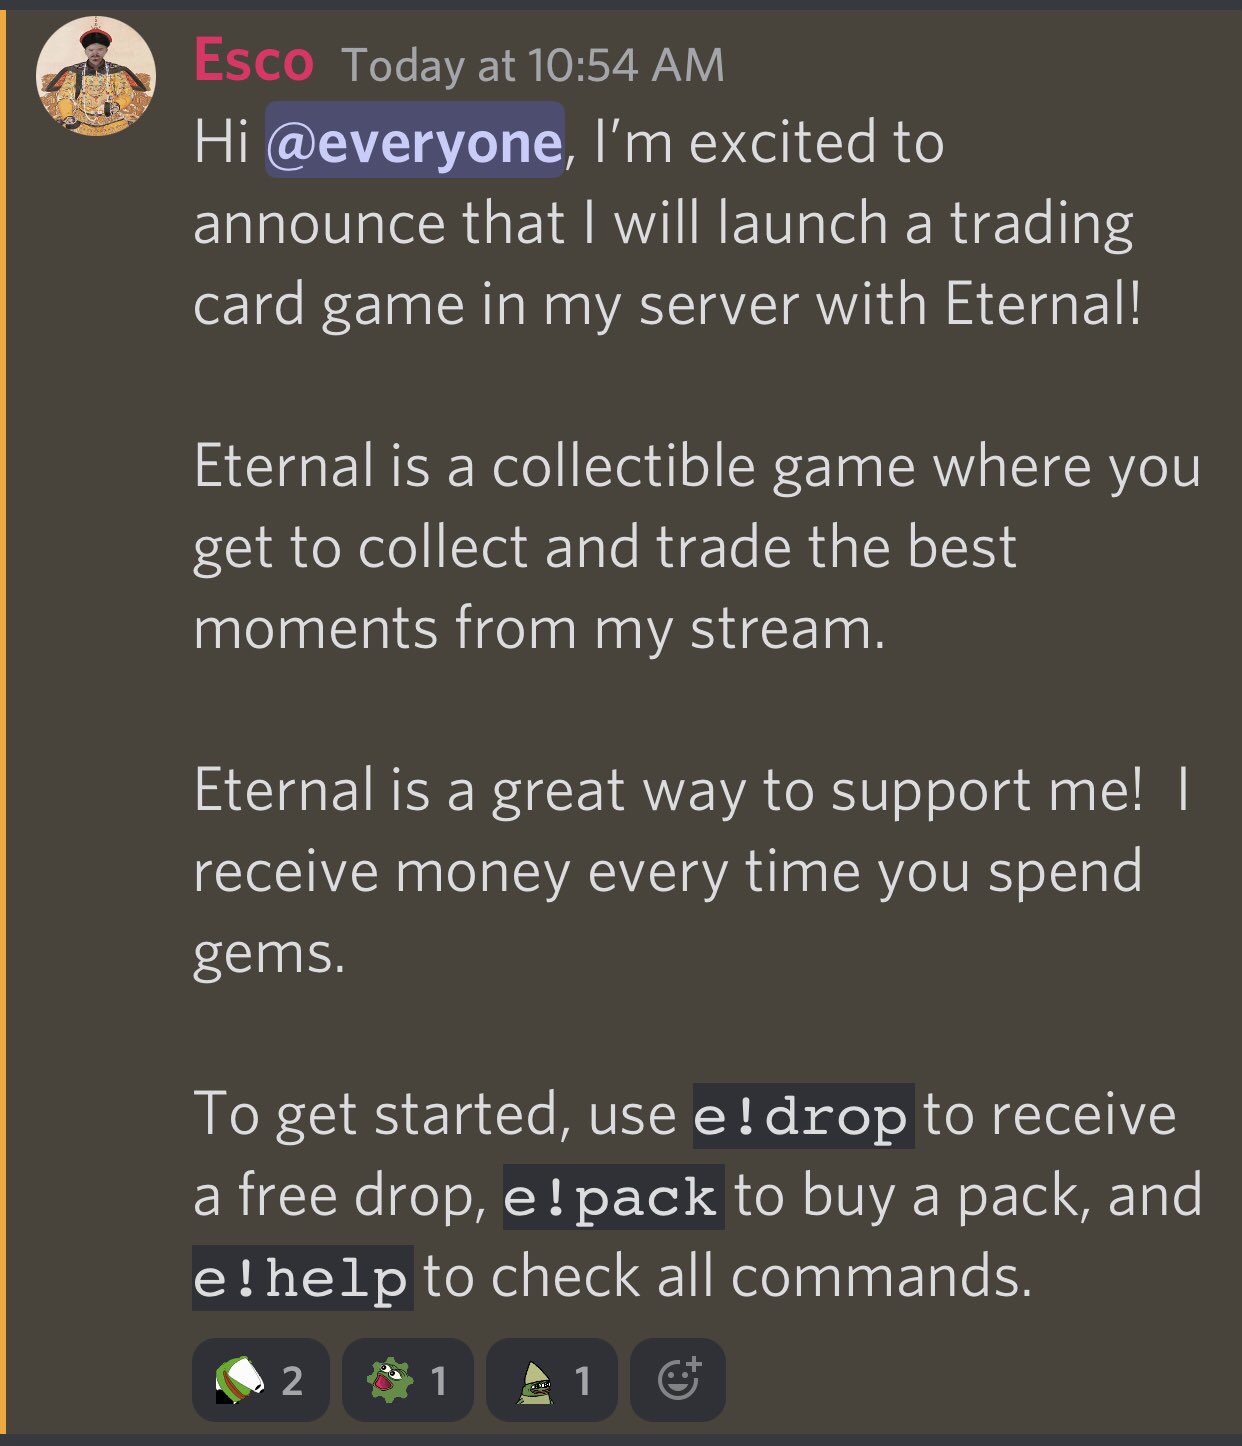 Playing on a trading server! WE GOT ETERNAL 